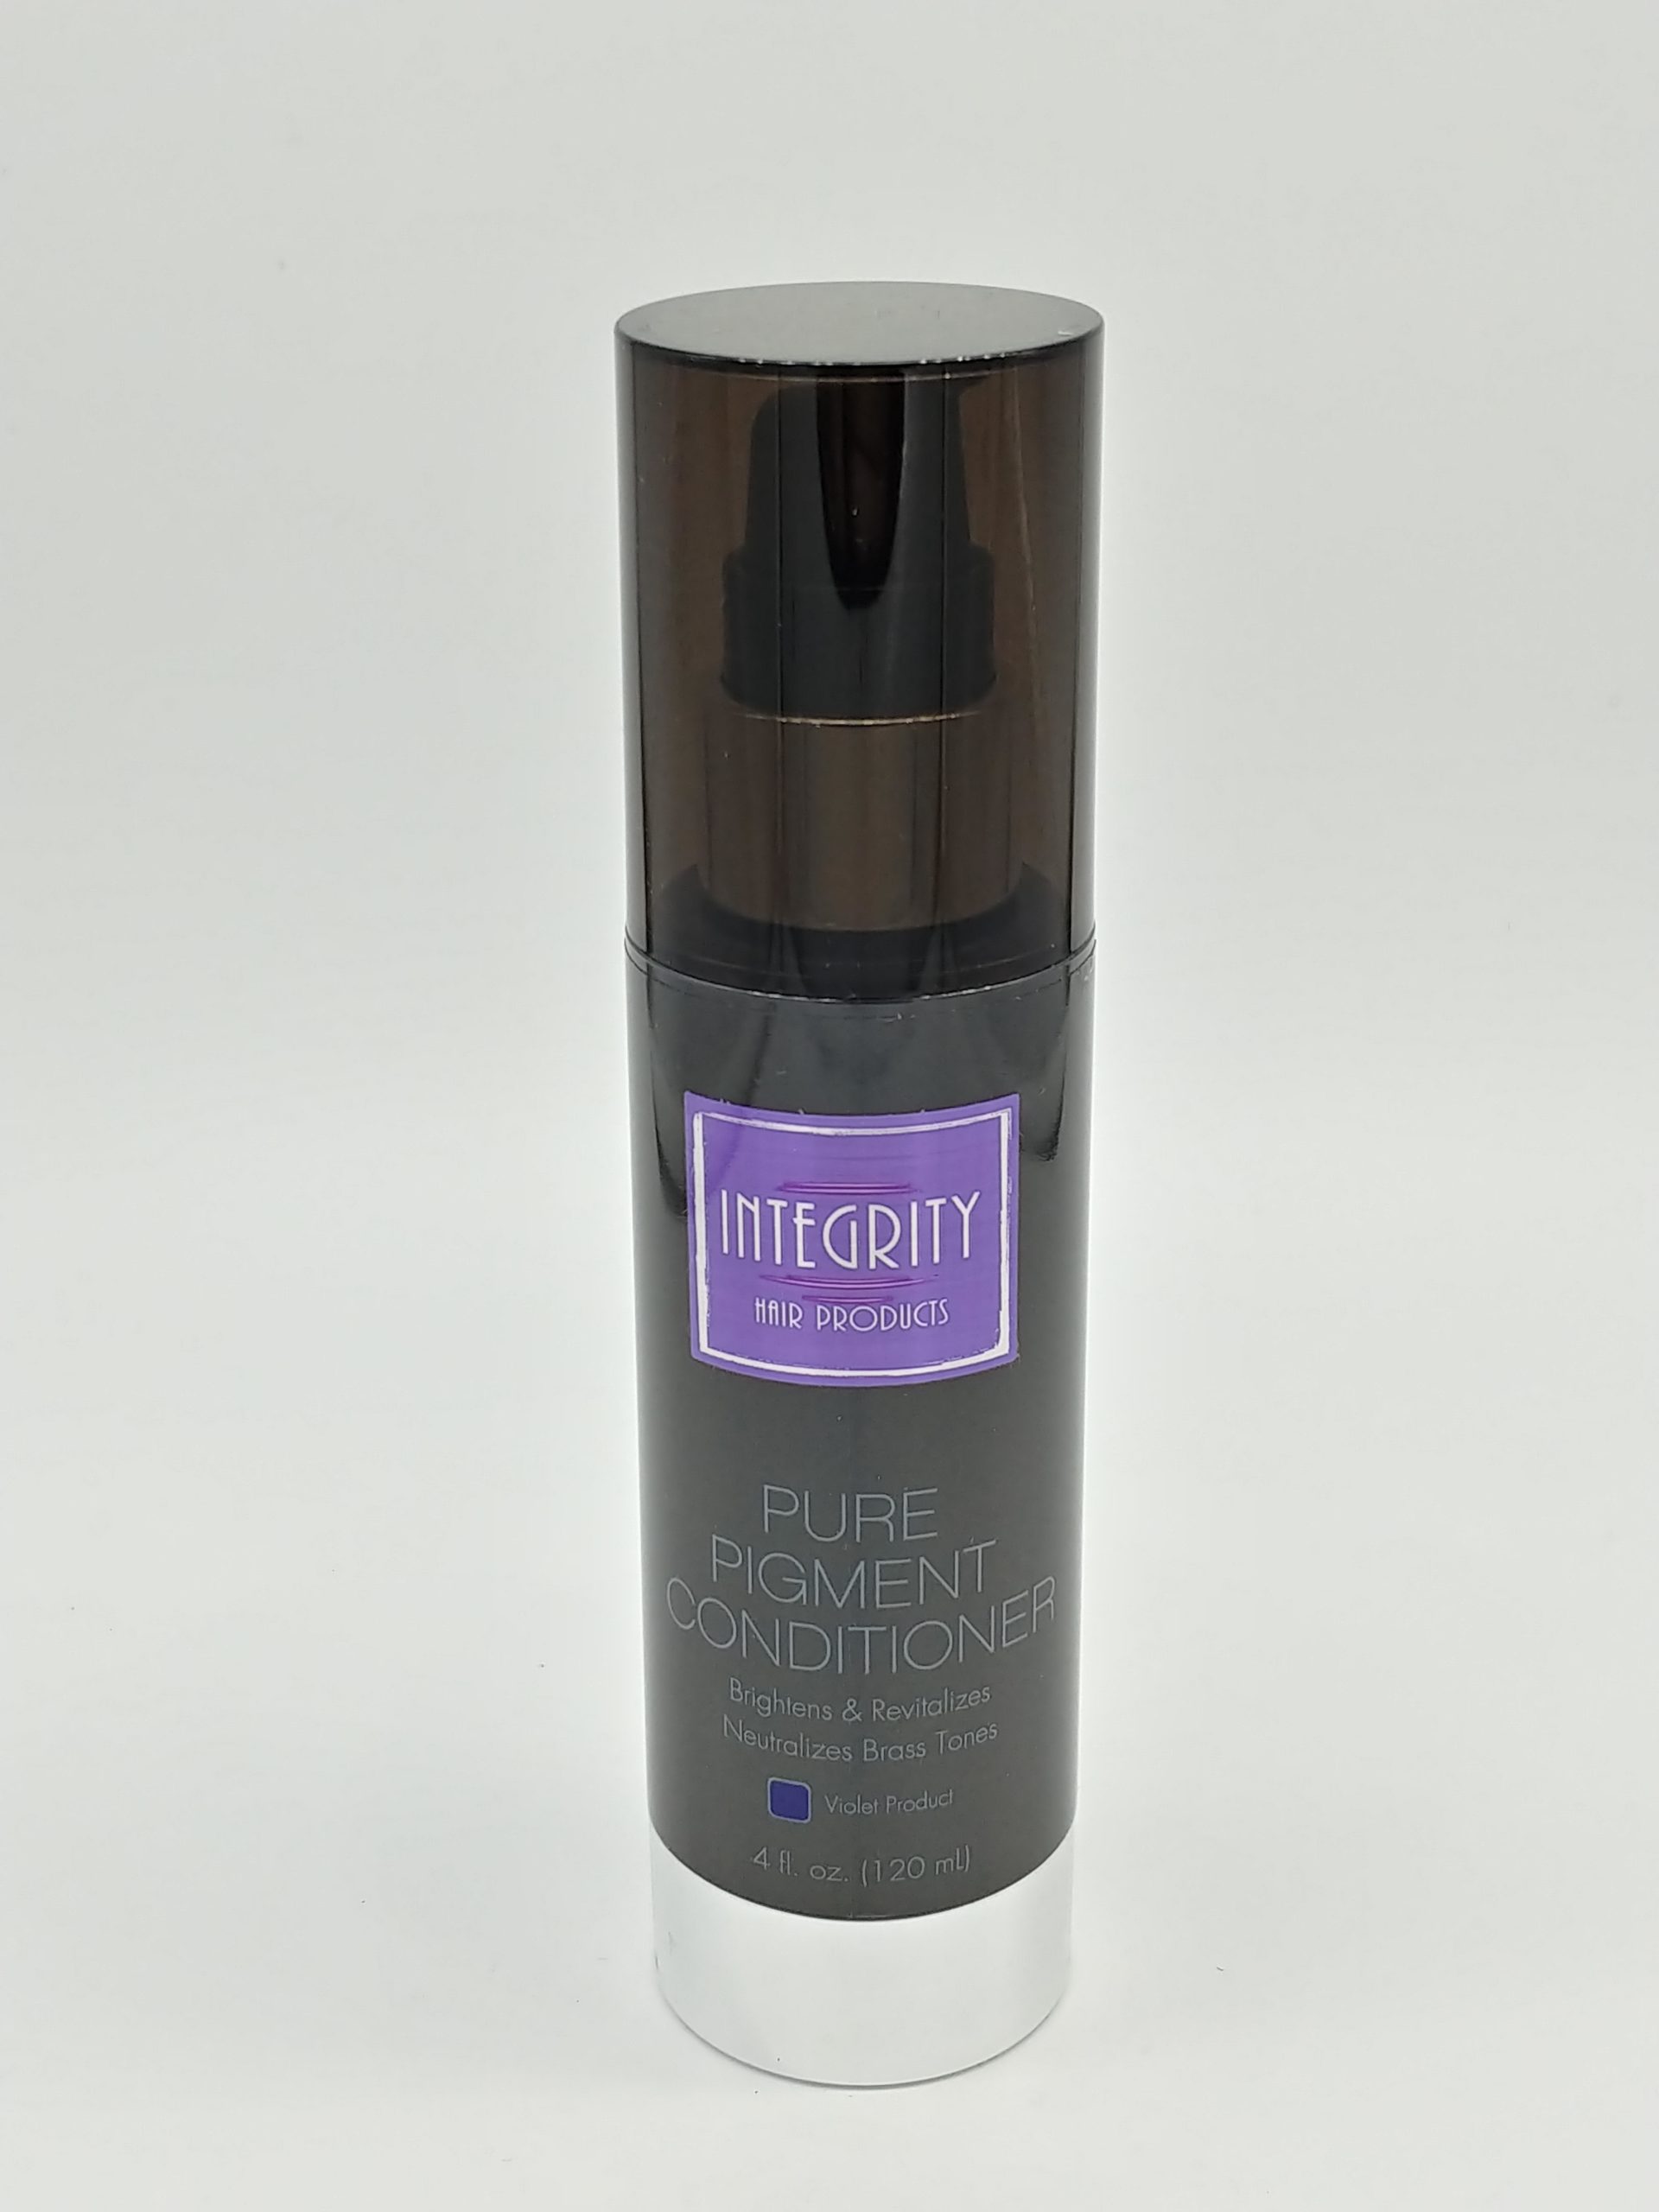 Integrity Pure Pigment Conditioner: Violet Product 4oz